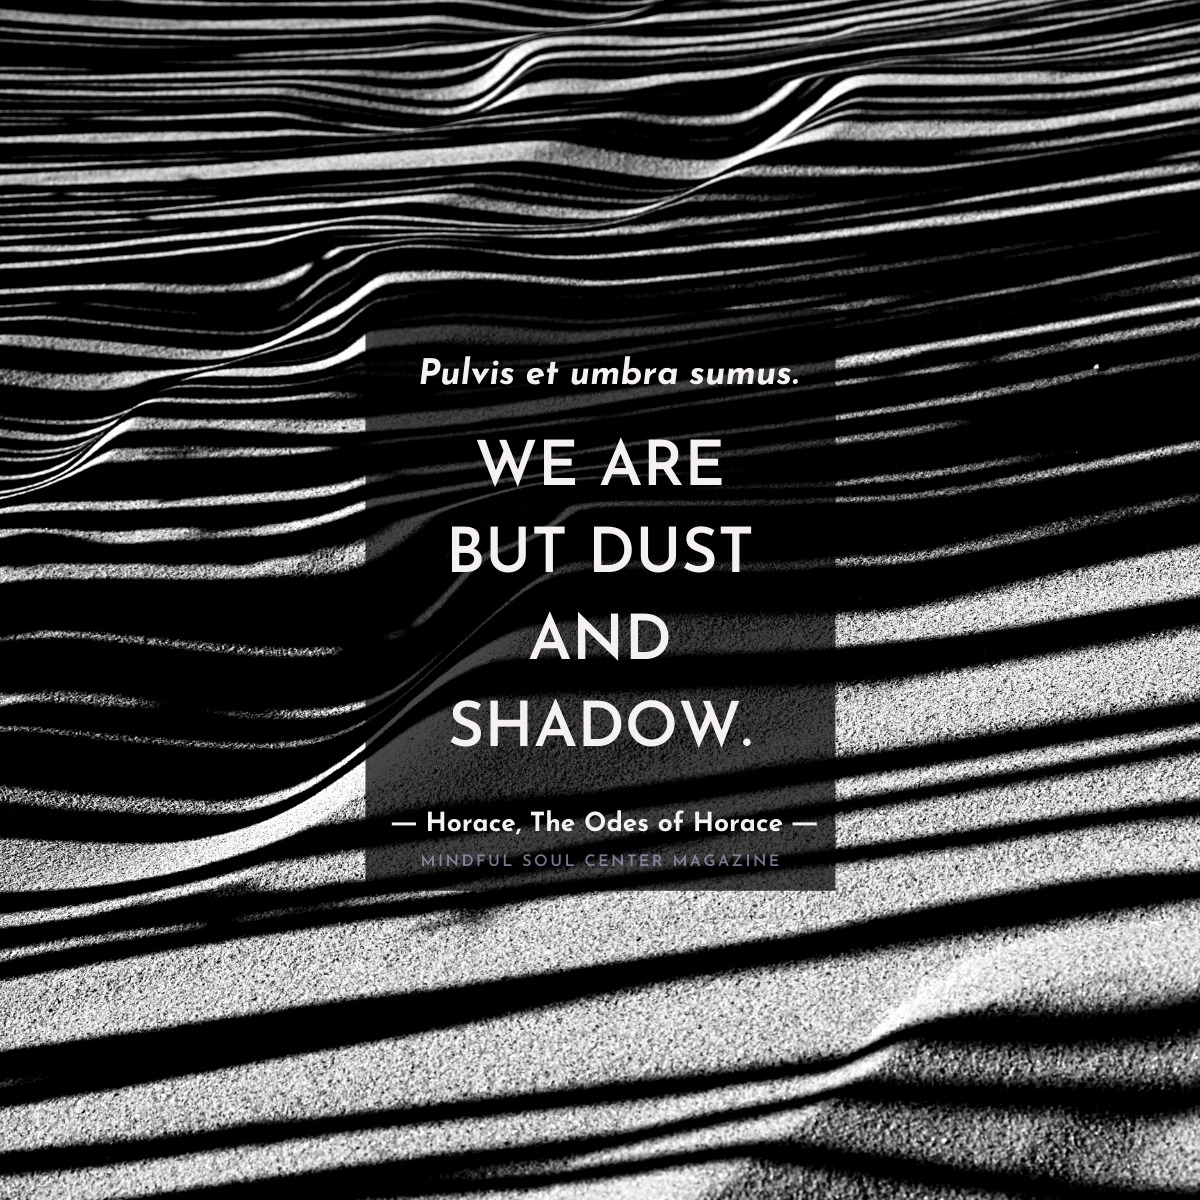 we are but dust and shadow horace pulvis et umbra sumus